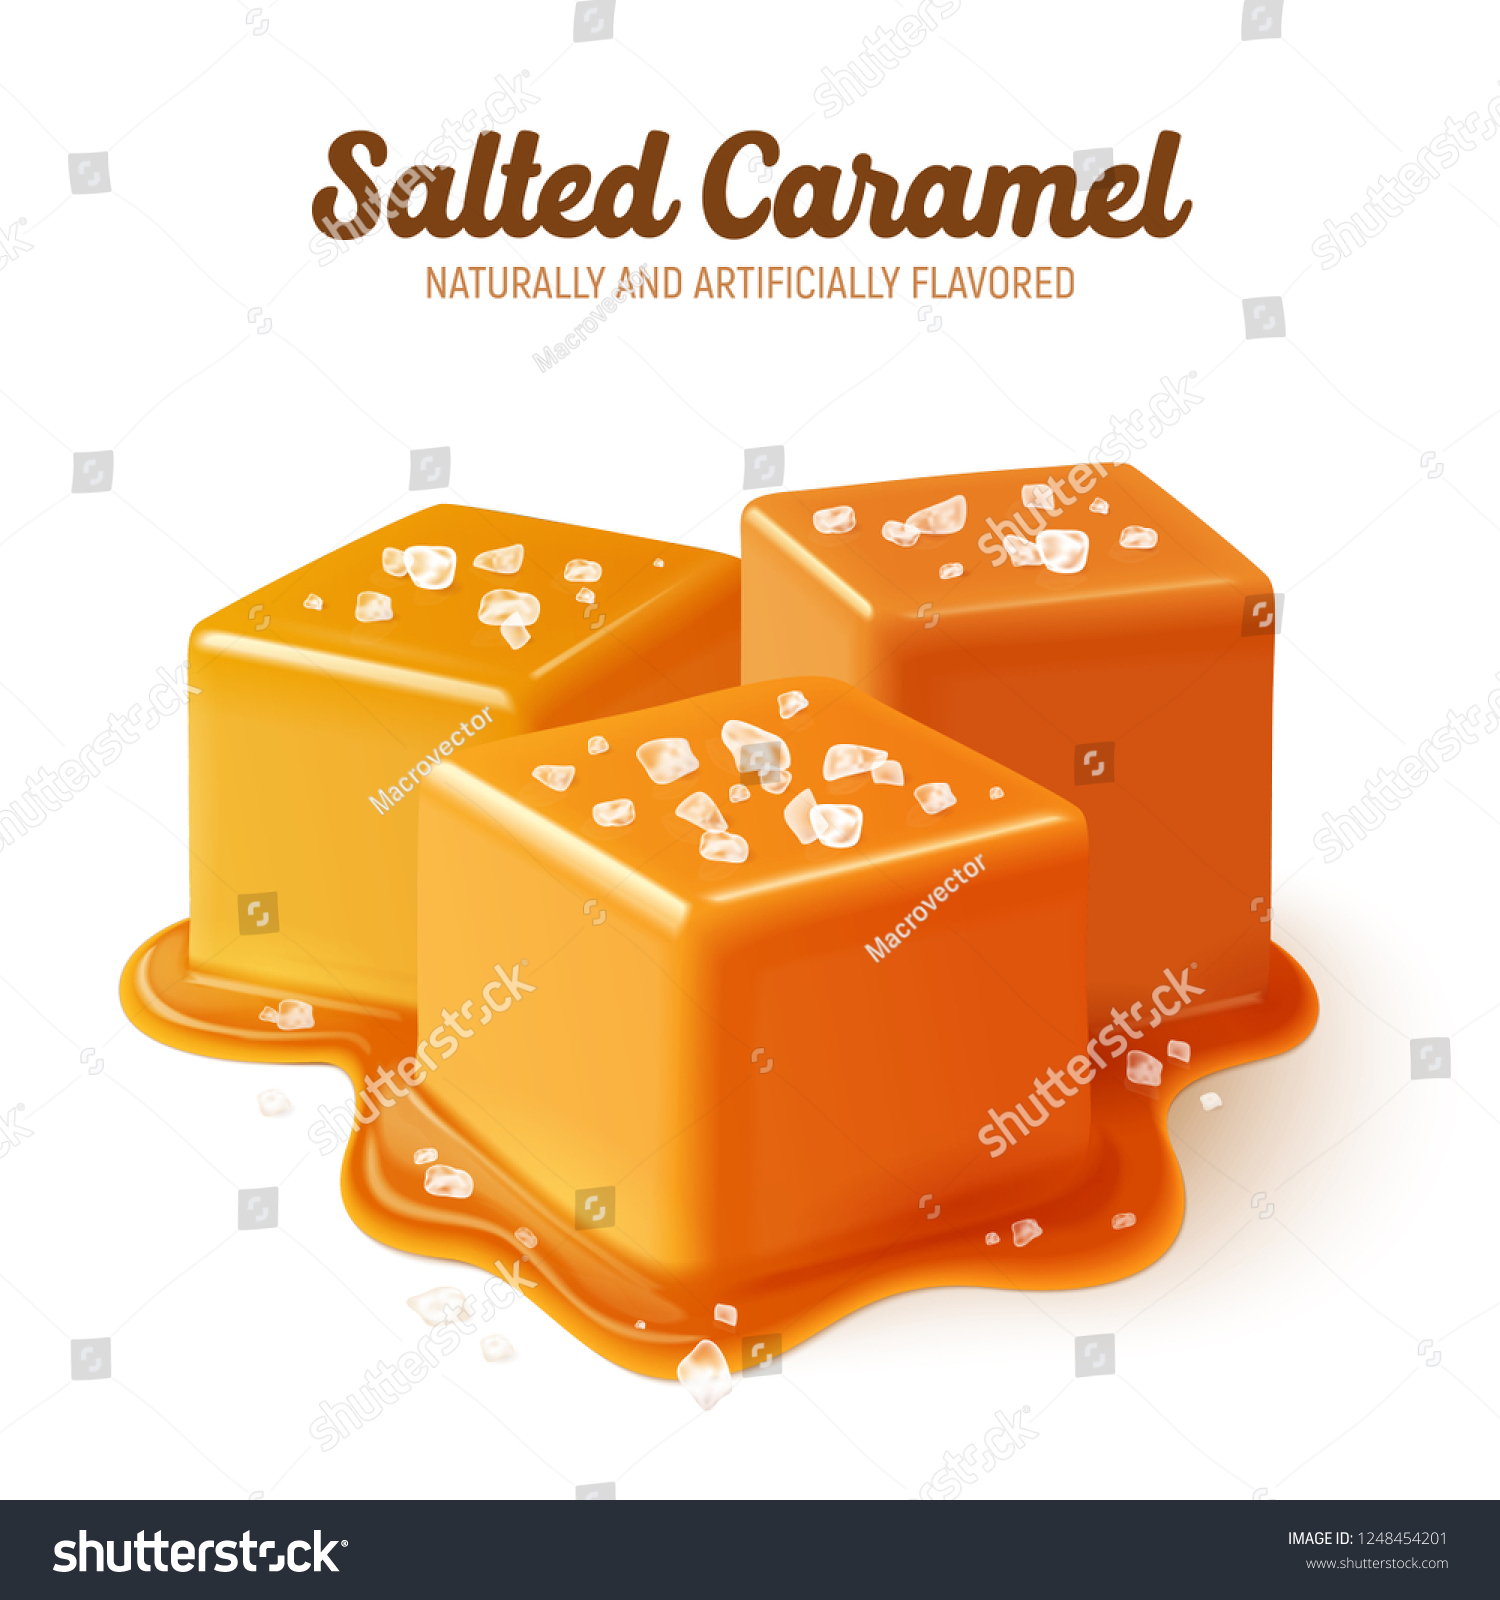 Colored and realistic salted caramel composition with naturally and artificially flavored headline vector illustration #1248454201